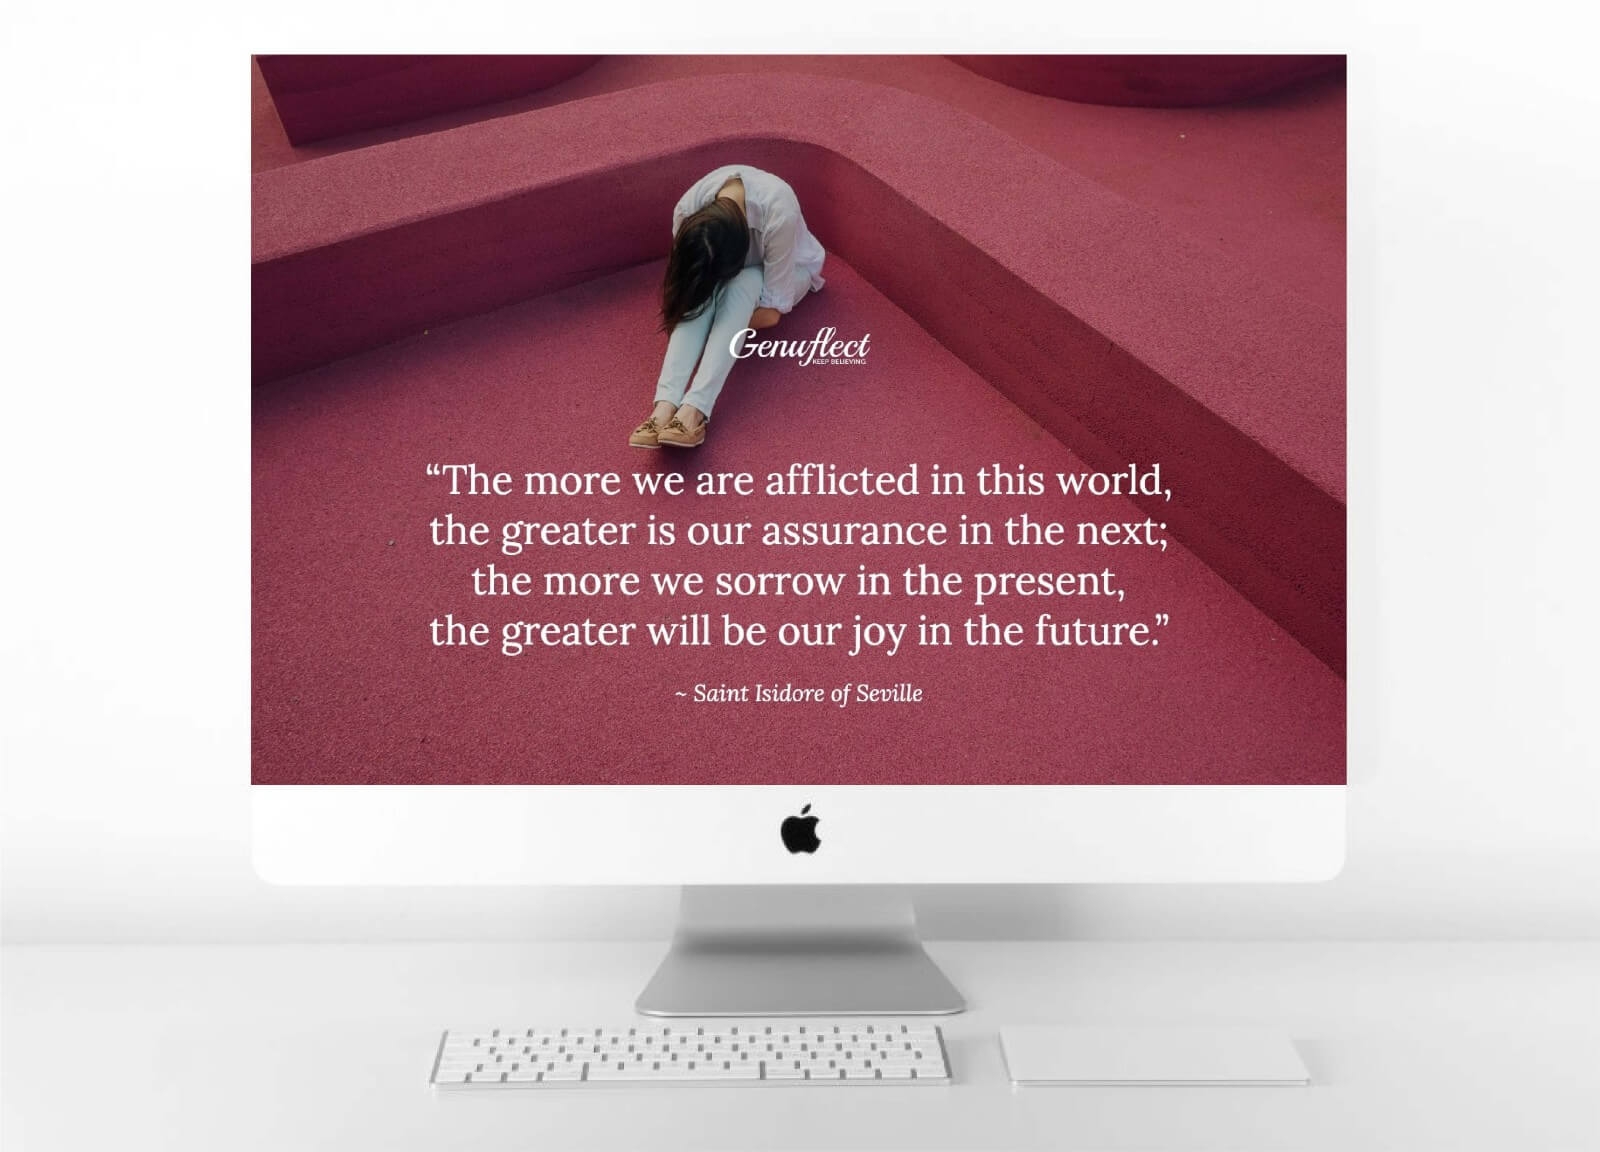 Genuflect computer background image of a Woman sitting on the floor bent over in grief